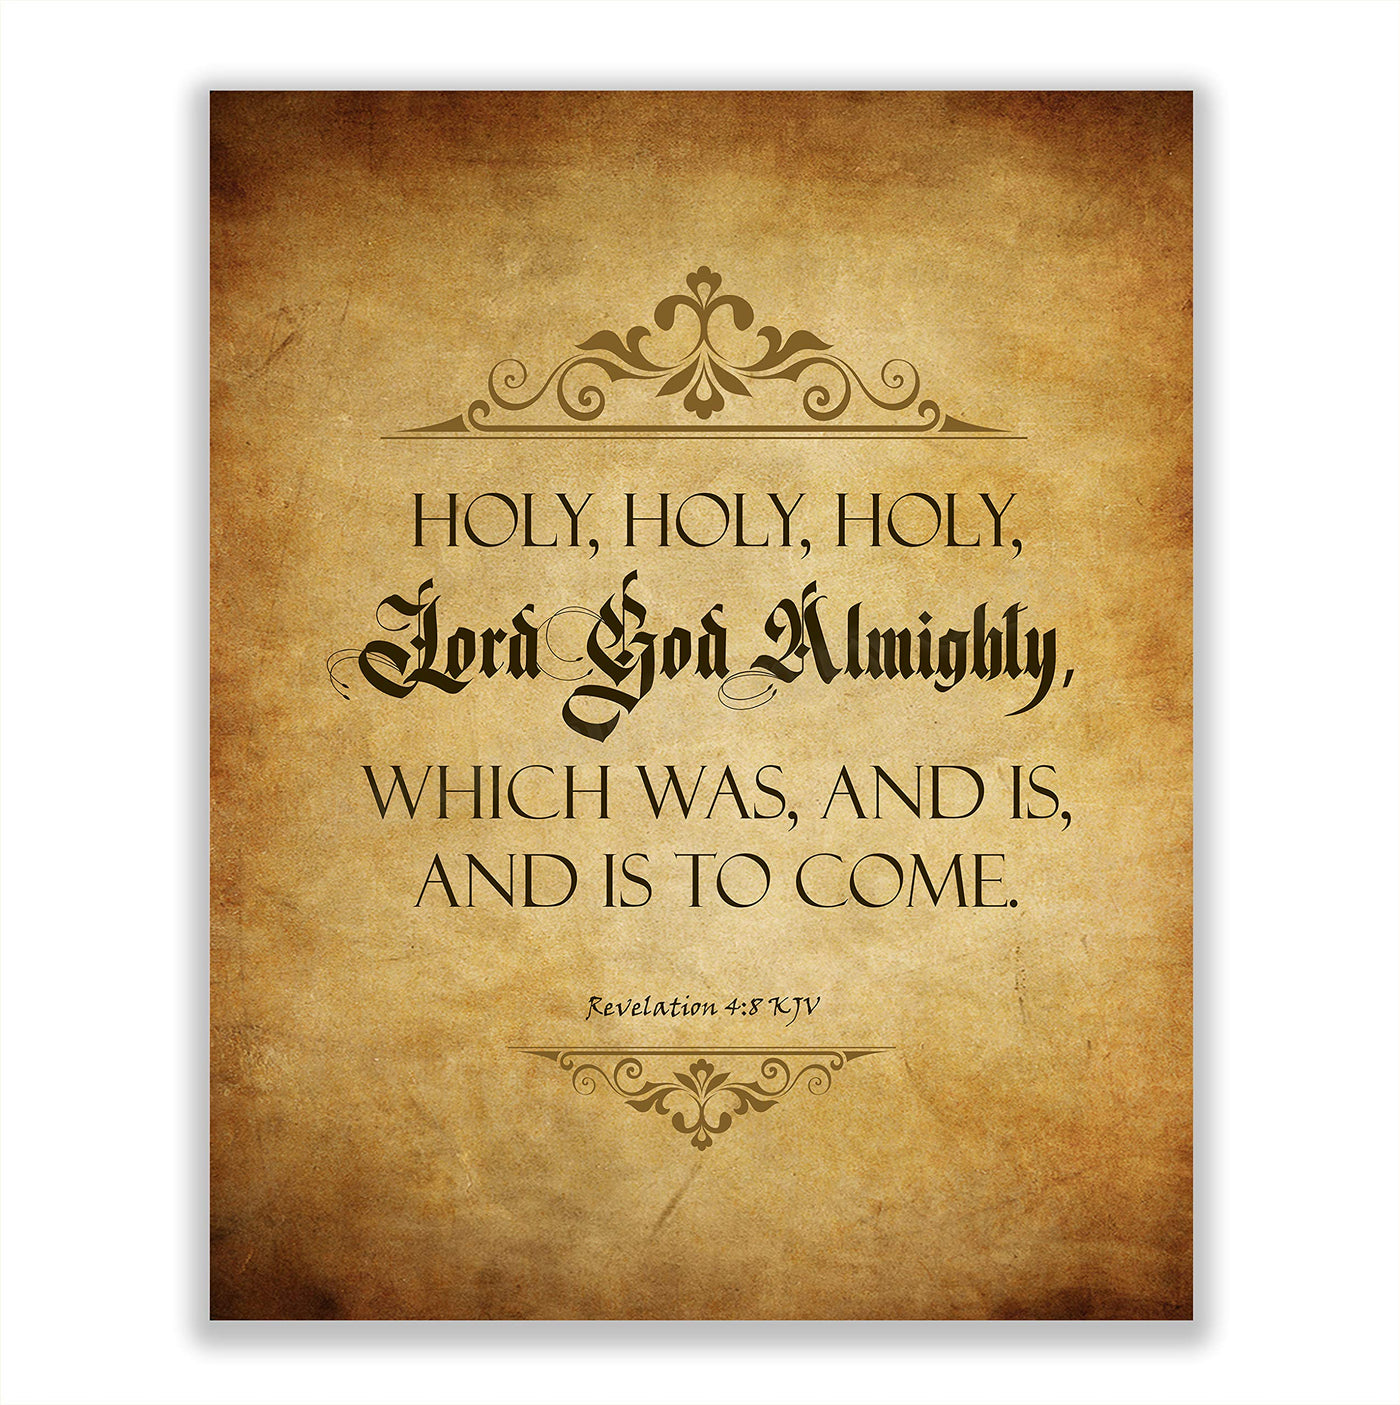 Holy, Holy, Holy-Lord God Almighty-Revelation 4:8-Bible Verse Wall Art Sign-8 x 10" Scripture Poster Print w/Replica Weathered Parchment Design-Ready to Frame. Perfect Home-Office-Church D?cor!